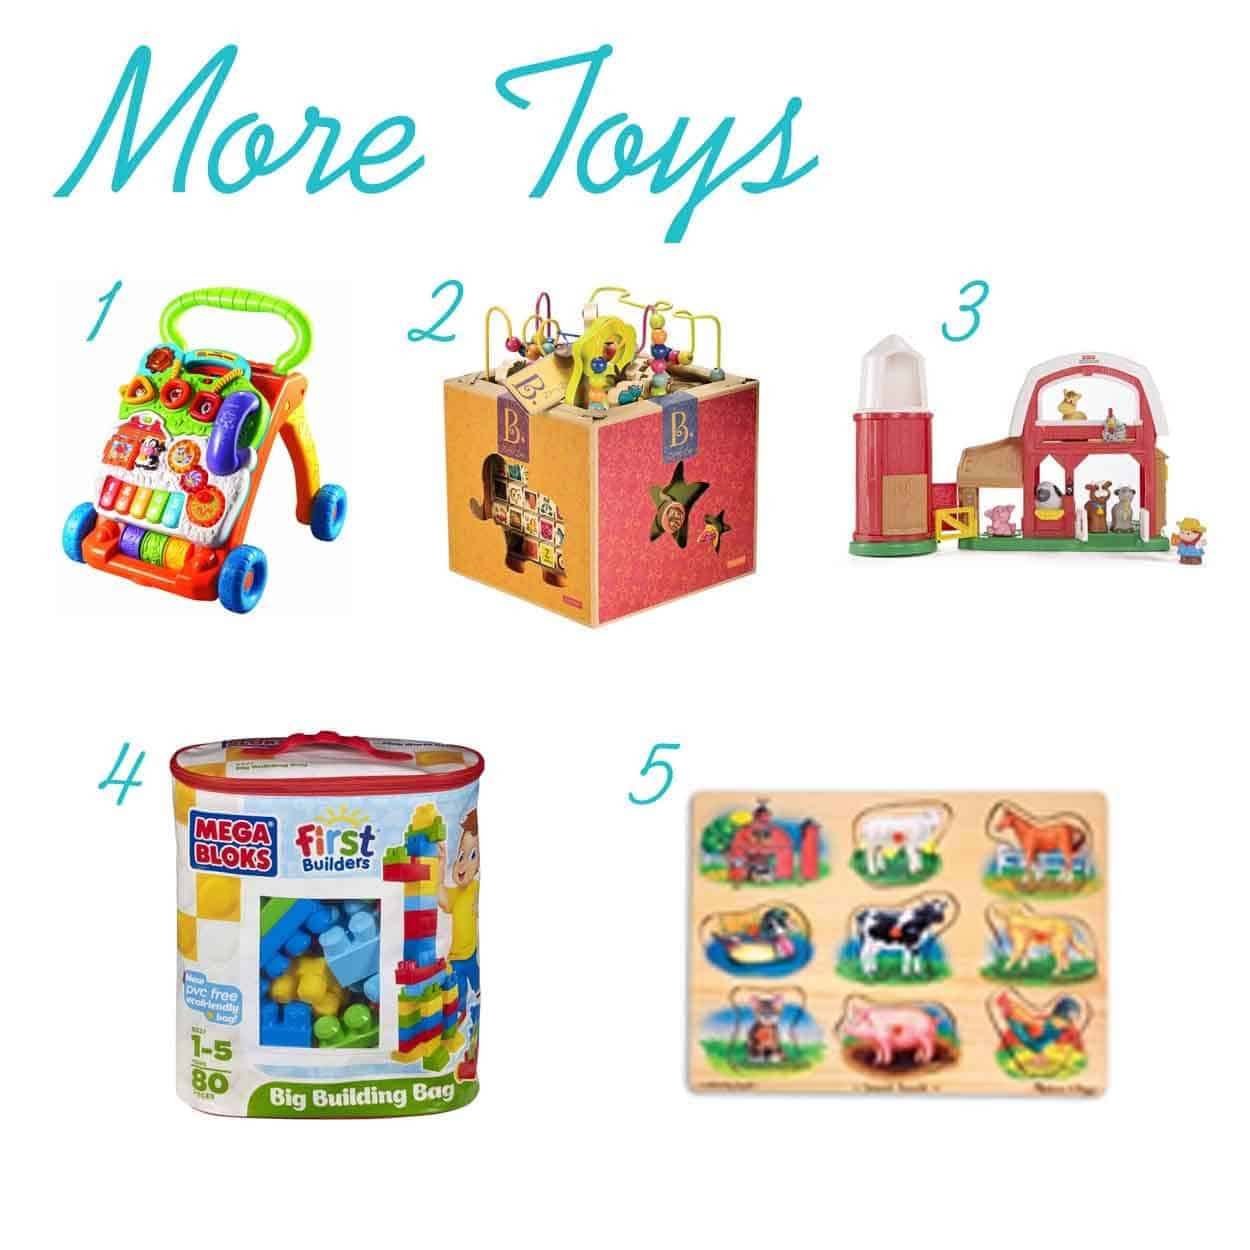 Birthday Gift Ideas For 1 Year Old Boy
 The Ultimate Gift List for a 1 Year Old Boy • The Pinning